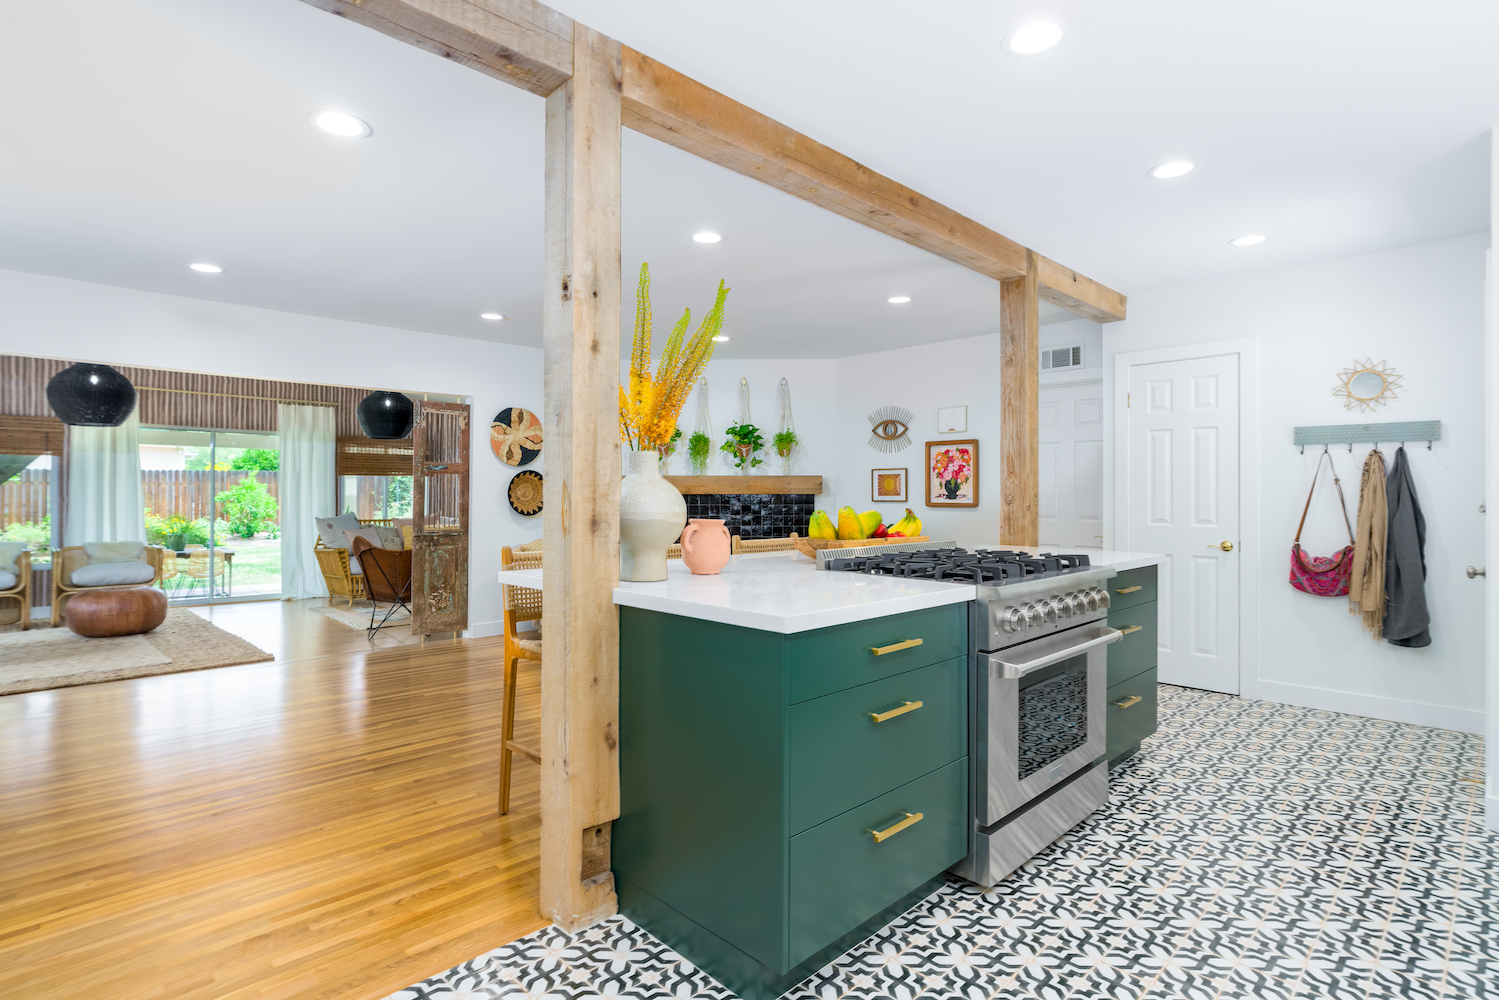 renovated kitchen with exposed wooden beams